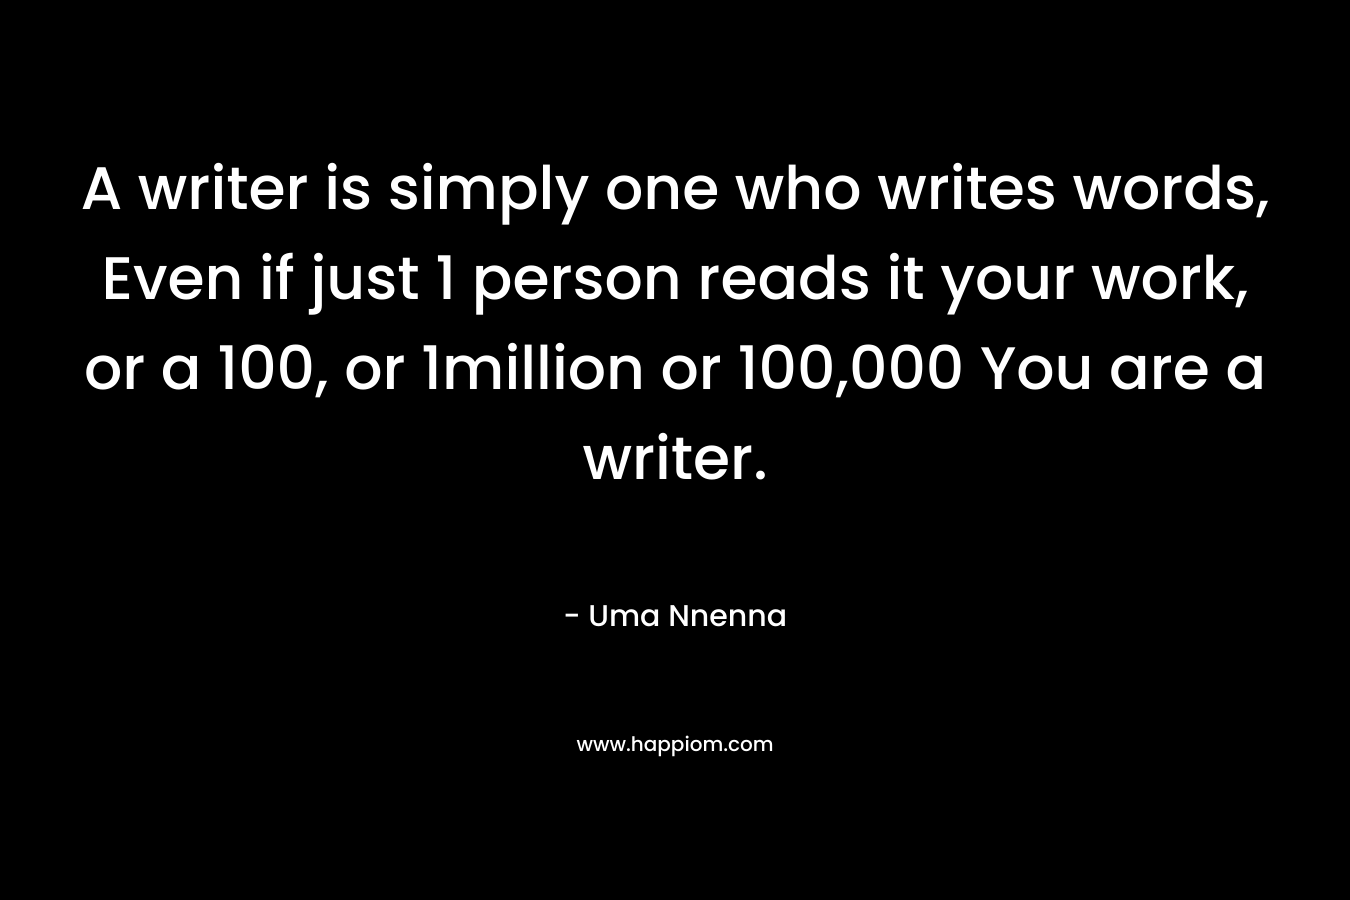 A writer is simply one who writes words, Even if just 1 person reads it your work, or a 100, or 1million or 100,000 You are a writer.